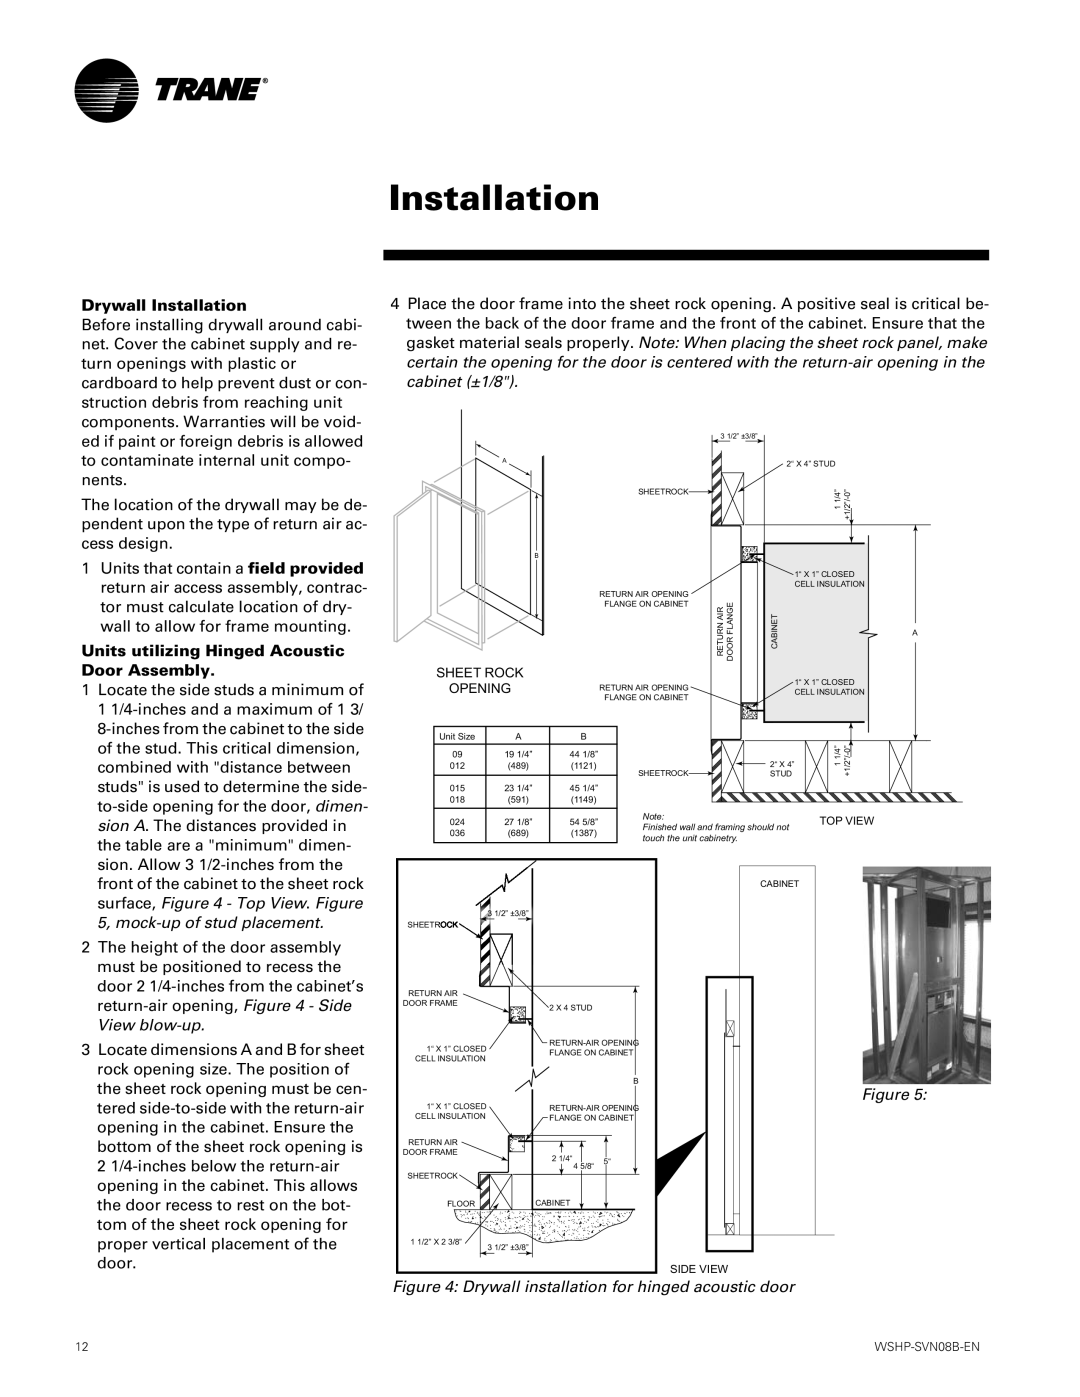 Trane GETB manual Drywall Installation, Units utilizing Hinged Acoustic Door Assembly, surface, - Top View. Figure 